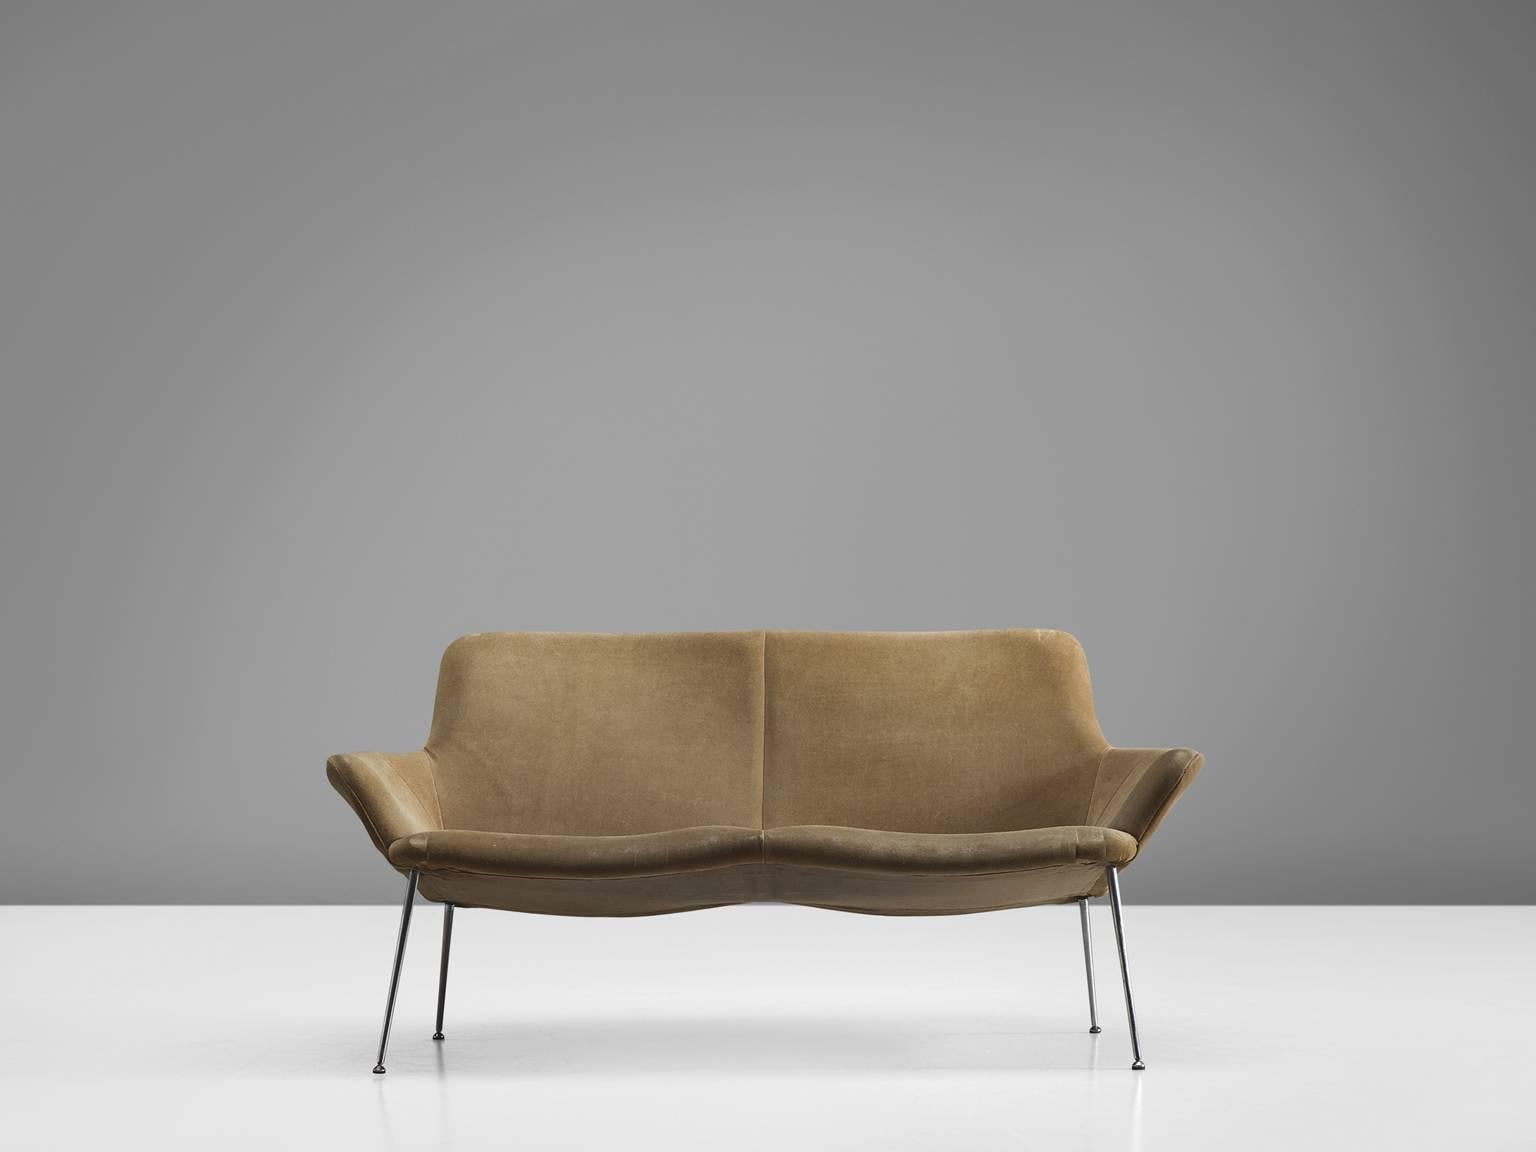 Sofa in metal and suede by Poul Nørreklit, Denmark, 1960s

This settee is upholstered with sand colored suede upholstery. The shell is slightly tilted and features a wide seat. The open design of this chairs is emphasized by the chromed tubular